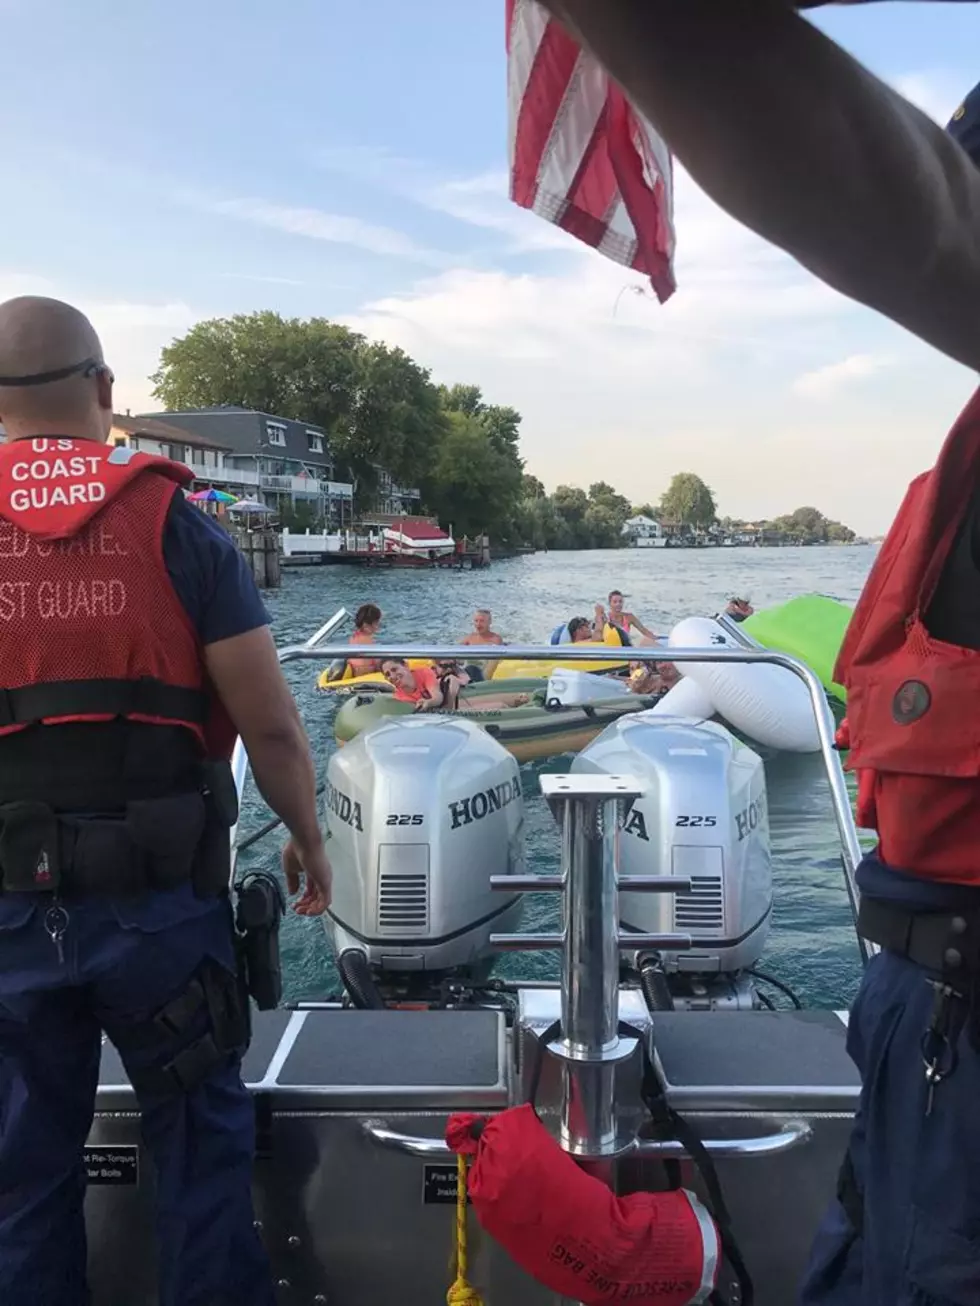 Port Huron’s 2017 “Float Down” Was Alright, but Maybe Stop? — U.S. & Canadian Coast Guards Issue Warning